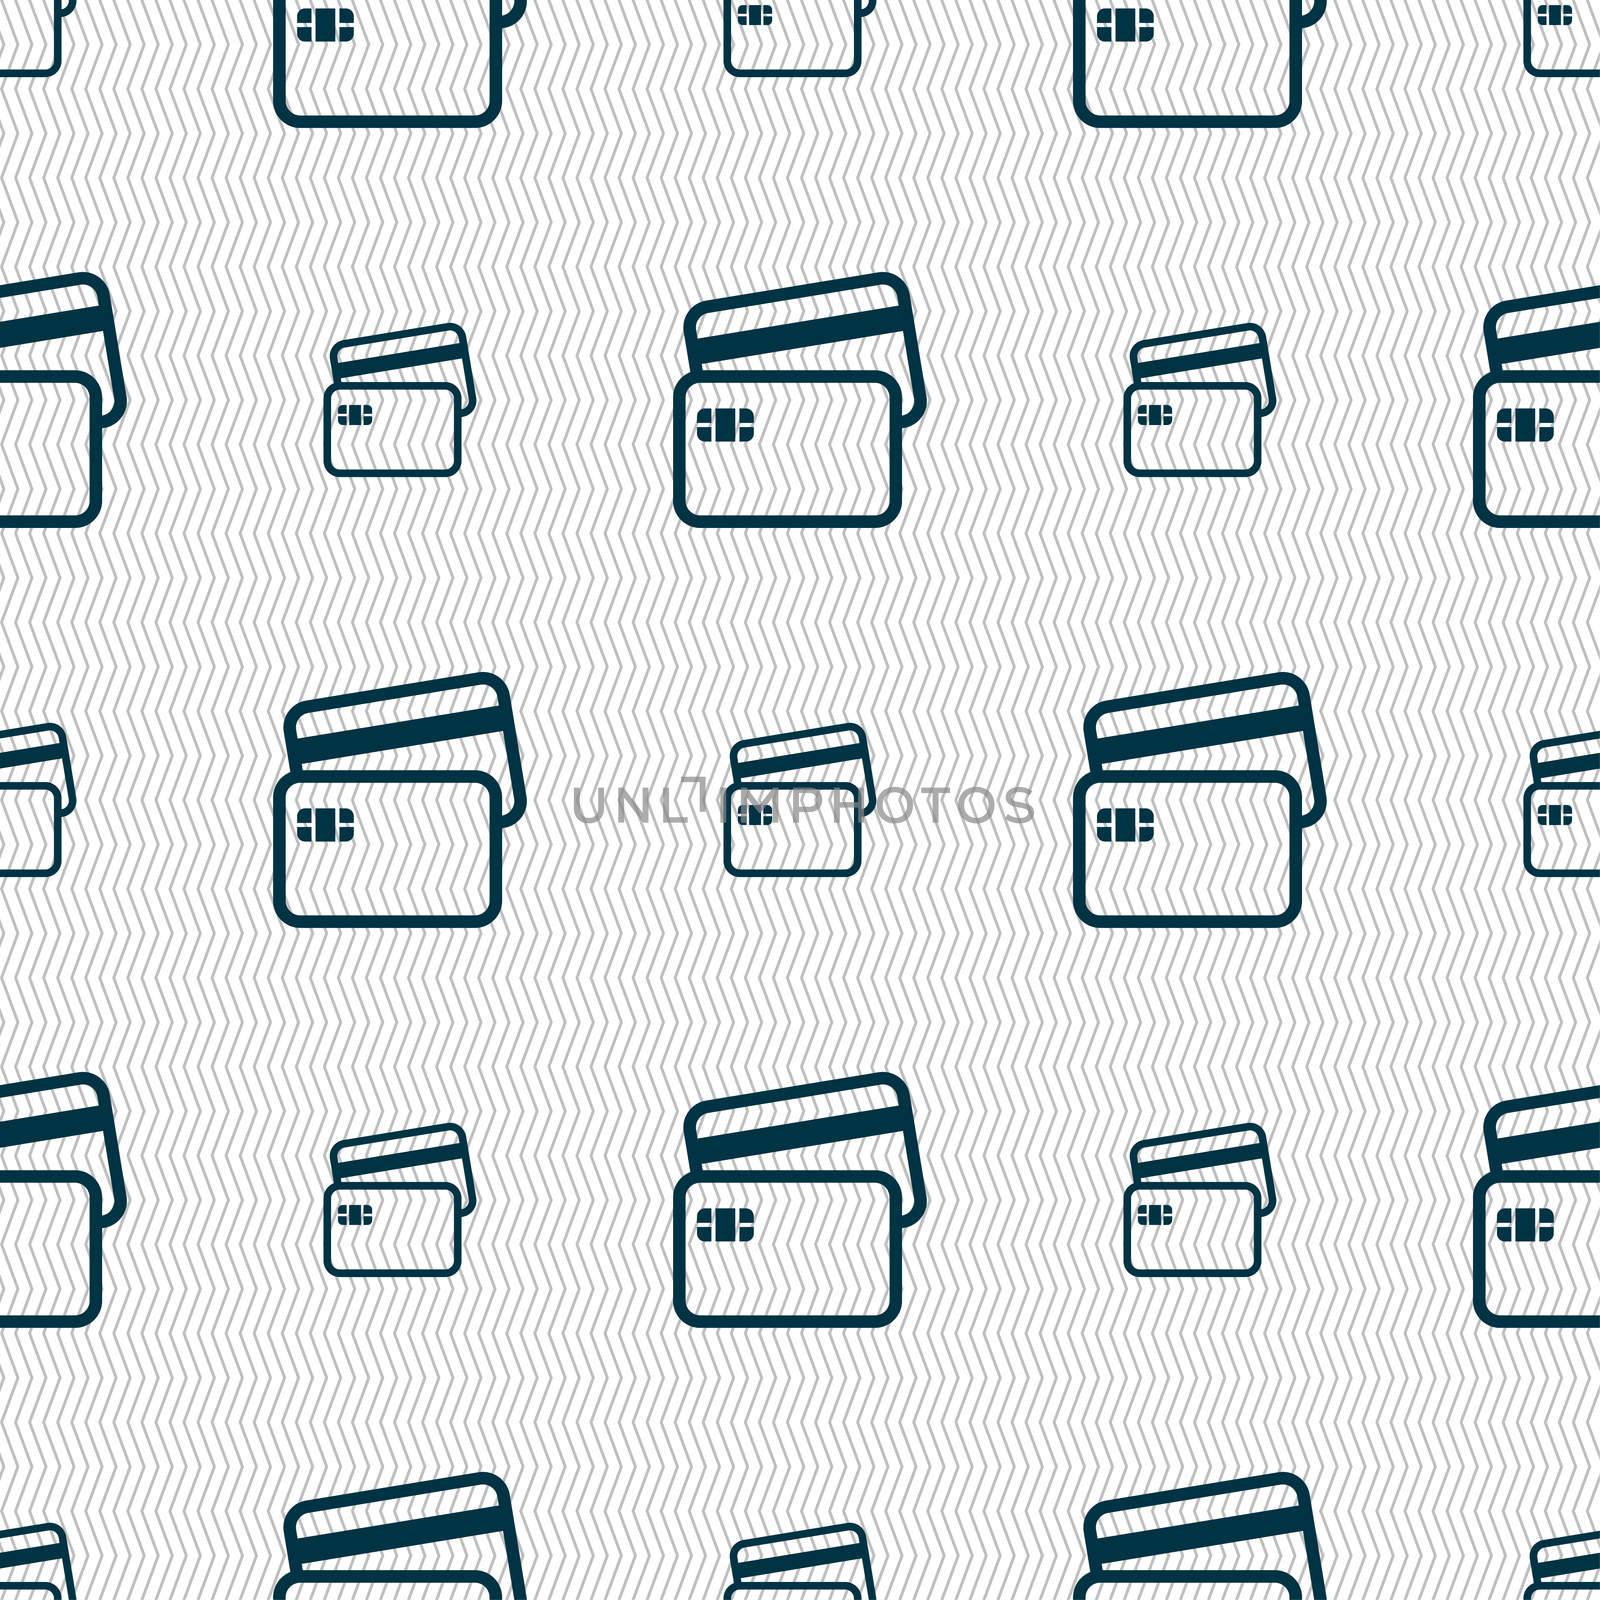 Credit card icon sign. Seamless pattern with geometric texture. illustration